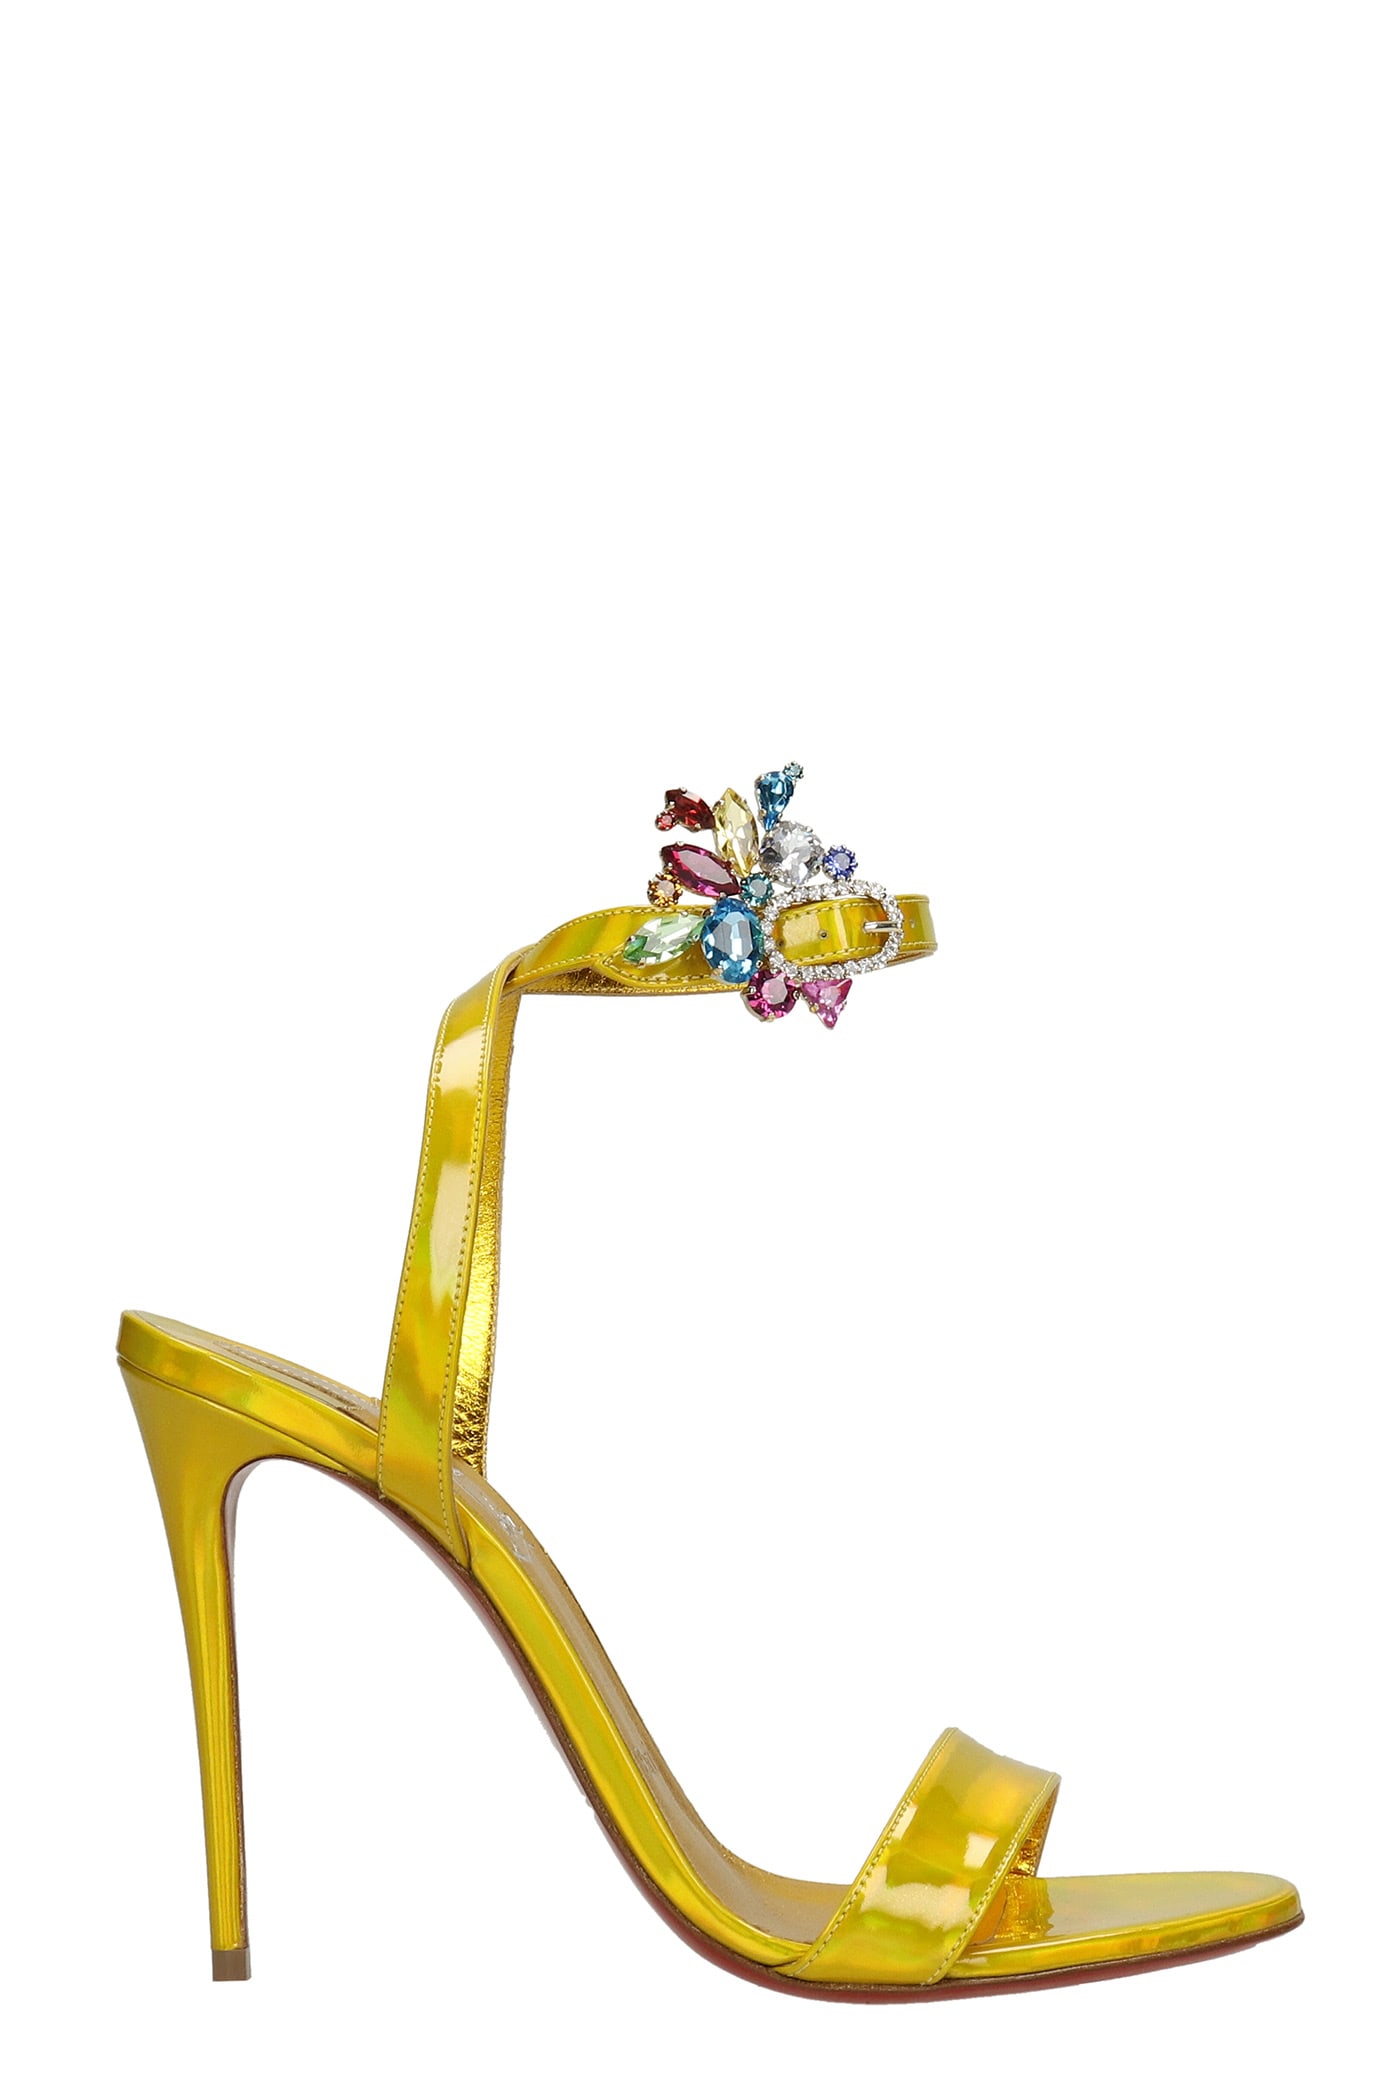 Christian Louboutin Goldie Joli 100 Sandals In Yellow Leather